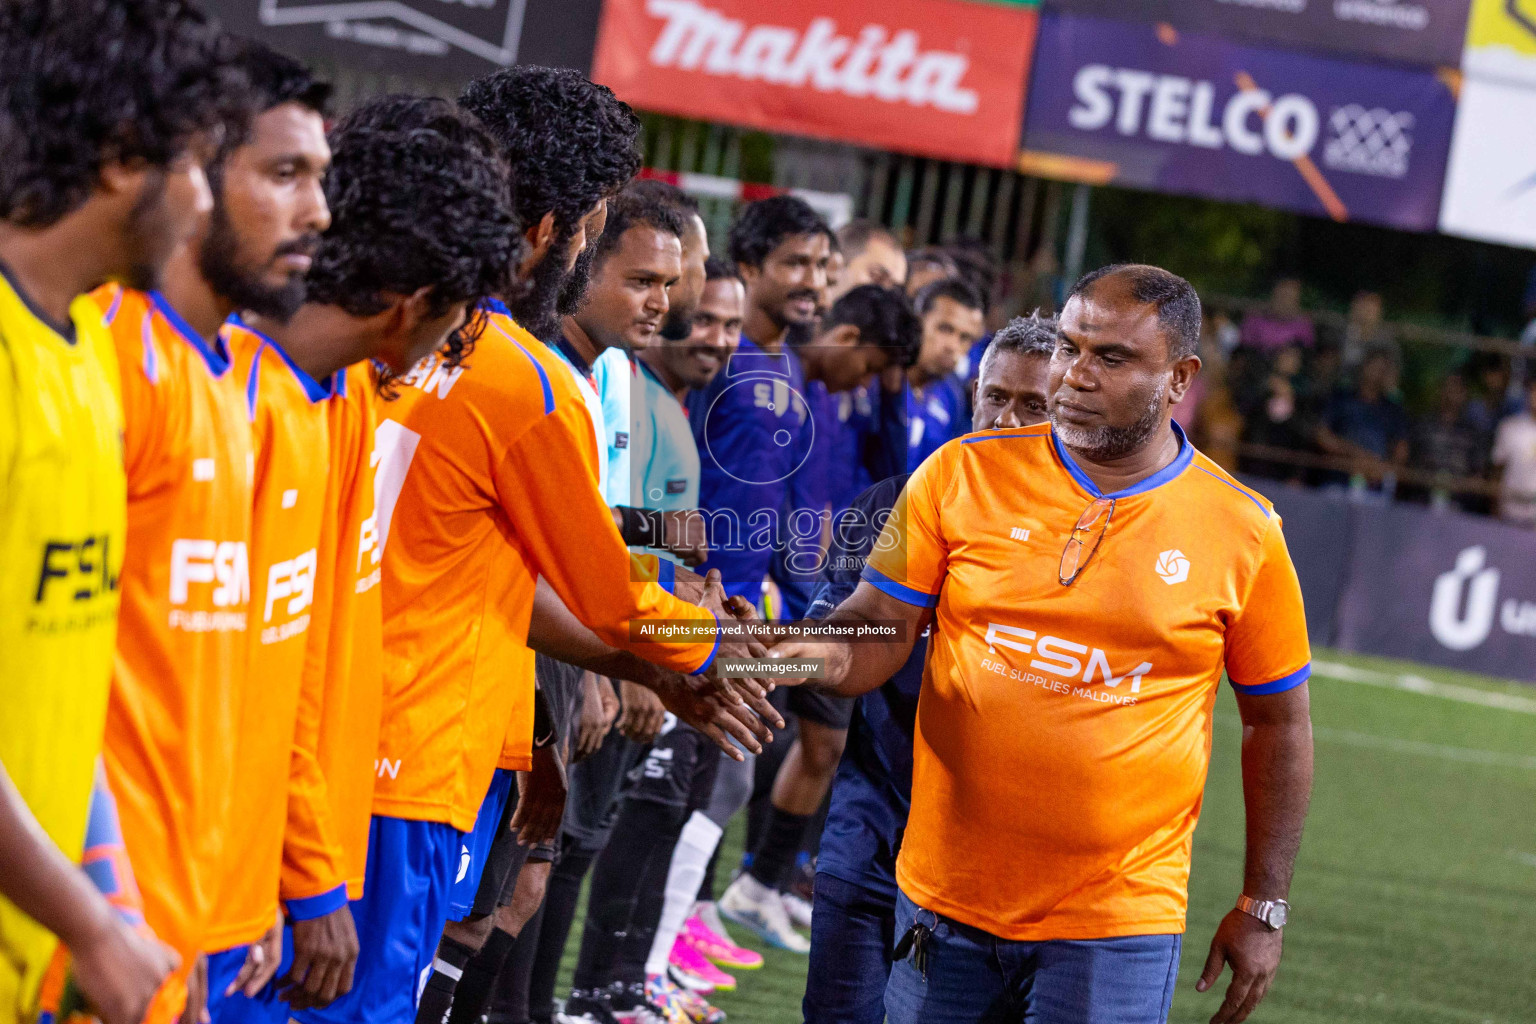 Team Fenaka vs Team FSM in Quarter Final of Club Maldives Cup 2023 held in Hulhumale, Maldives, on Sunday, 13th August 2023
Photos: Ismail Thoriq / images.mv